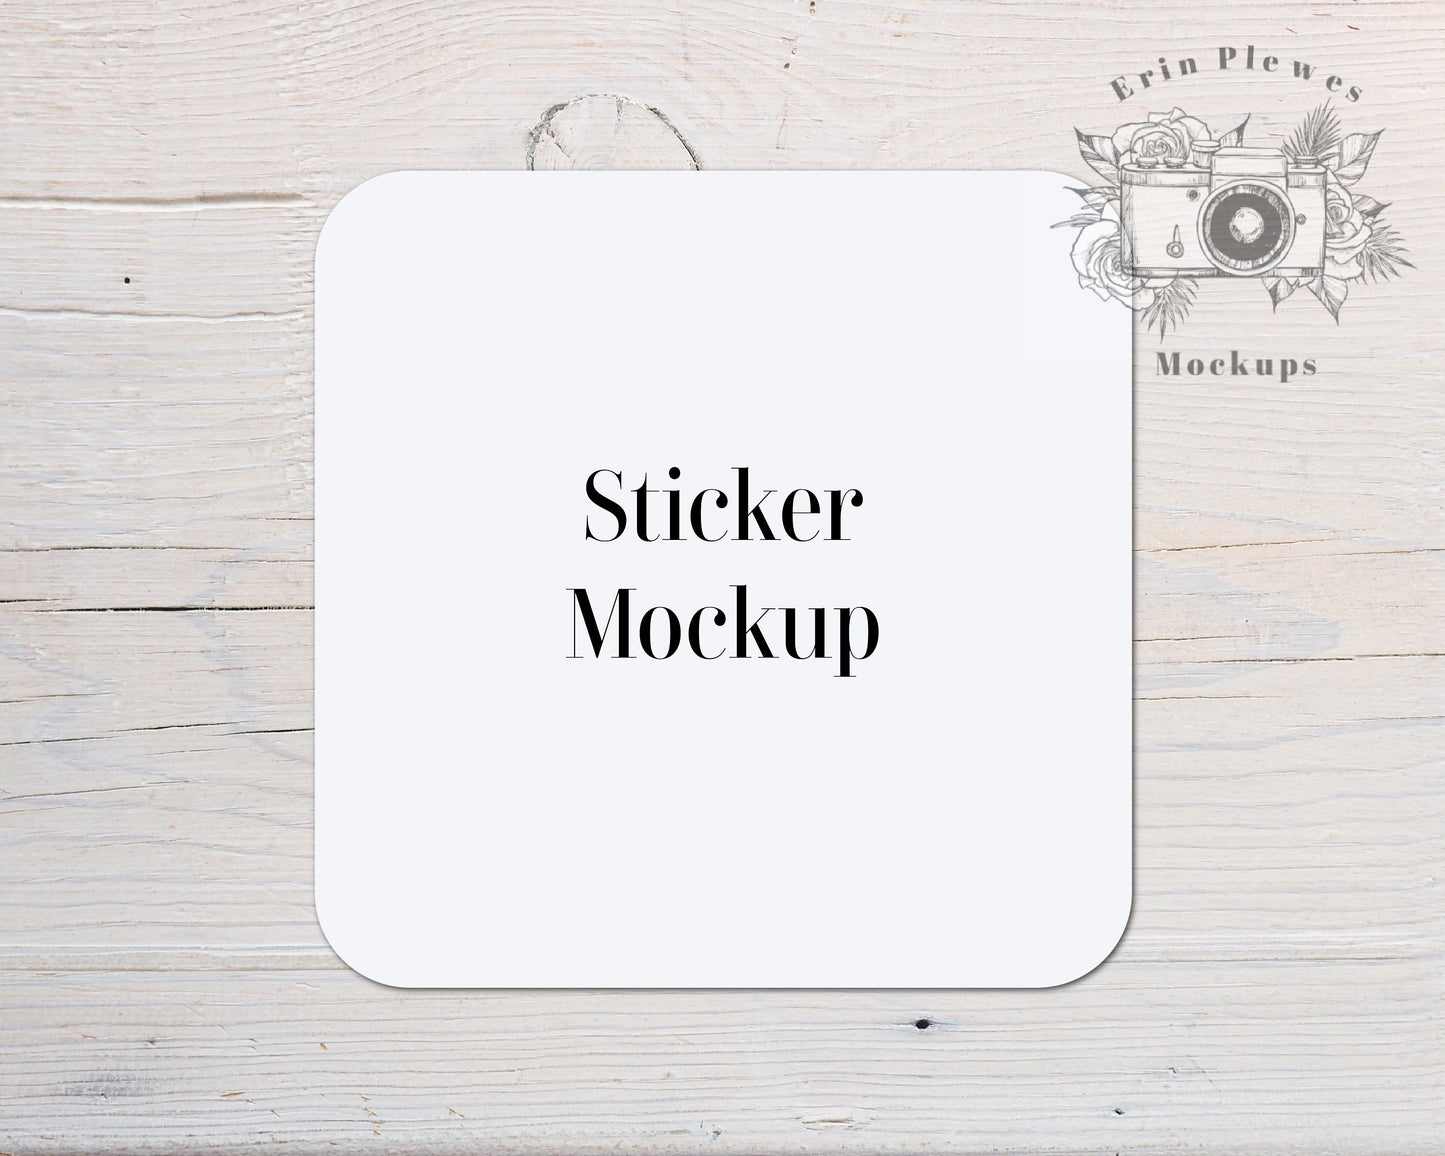 Square Sticker Mockup with Rounded Edges, Coaster Mock Up on Rustic White Wood, Jpeg Instant Digital Download Template